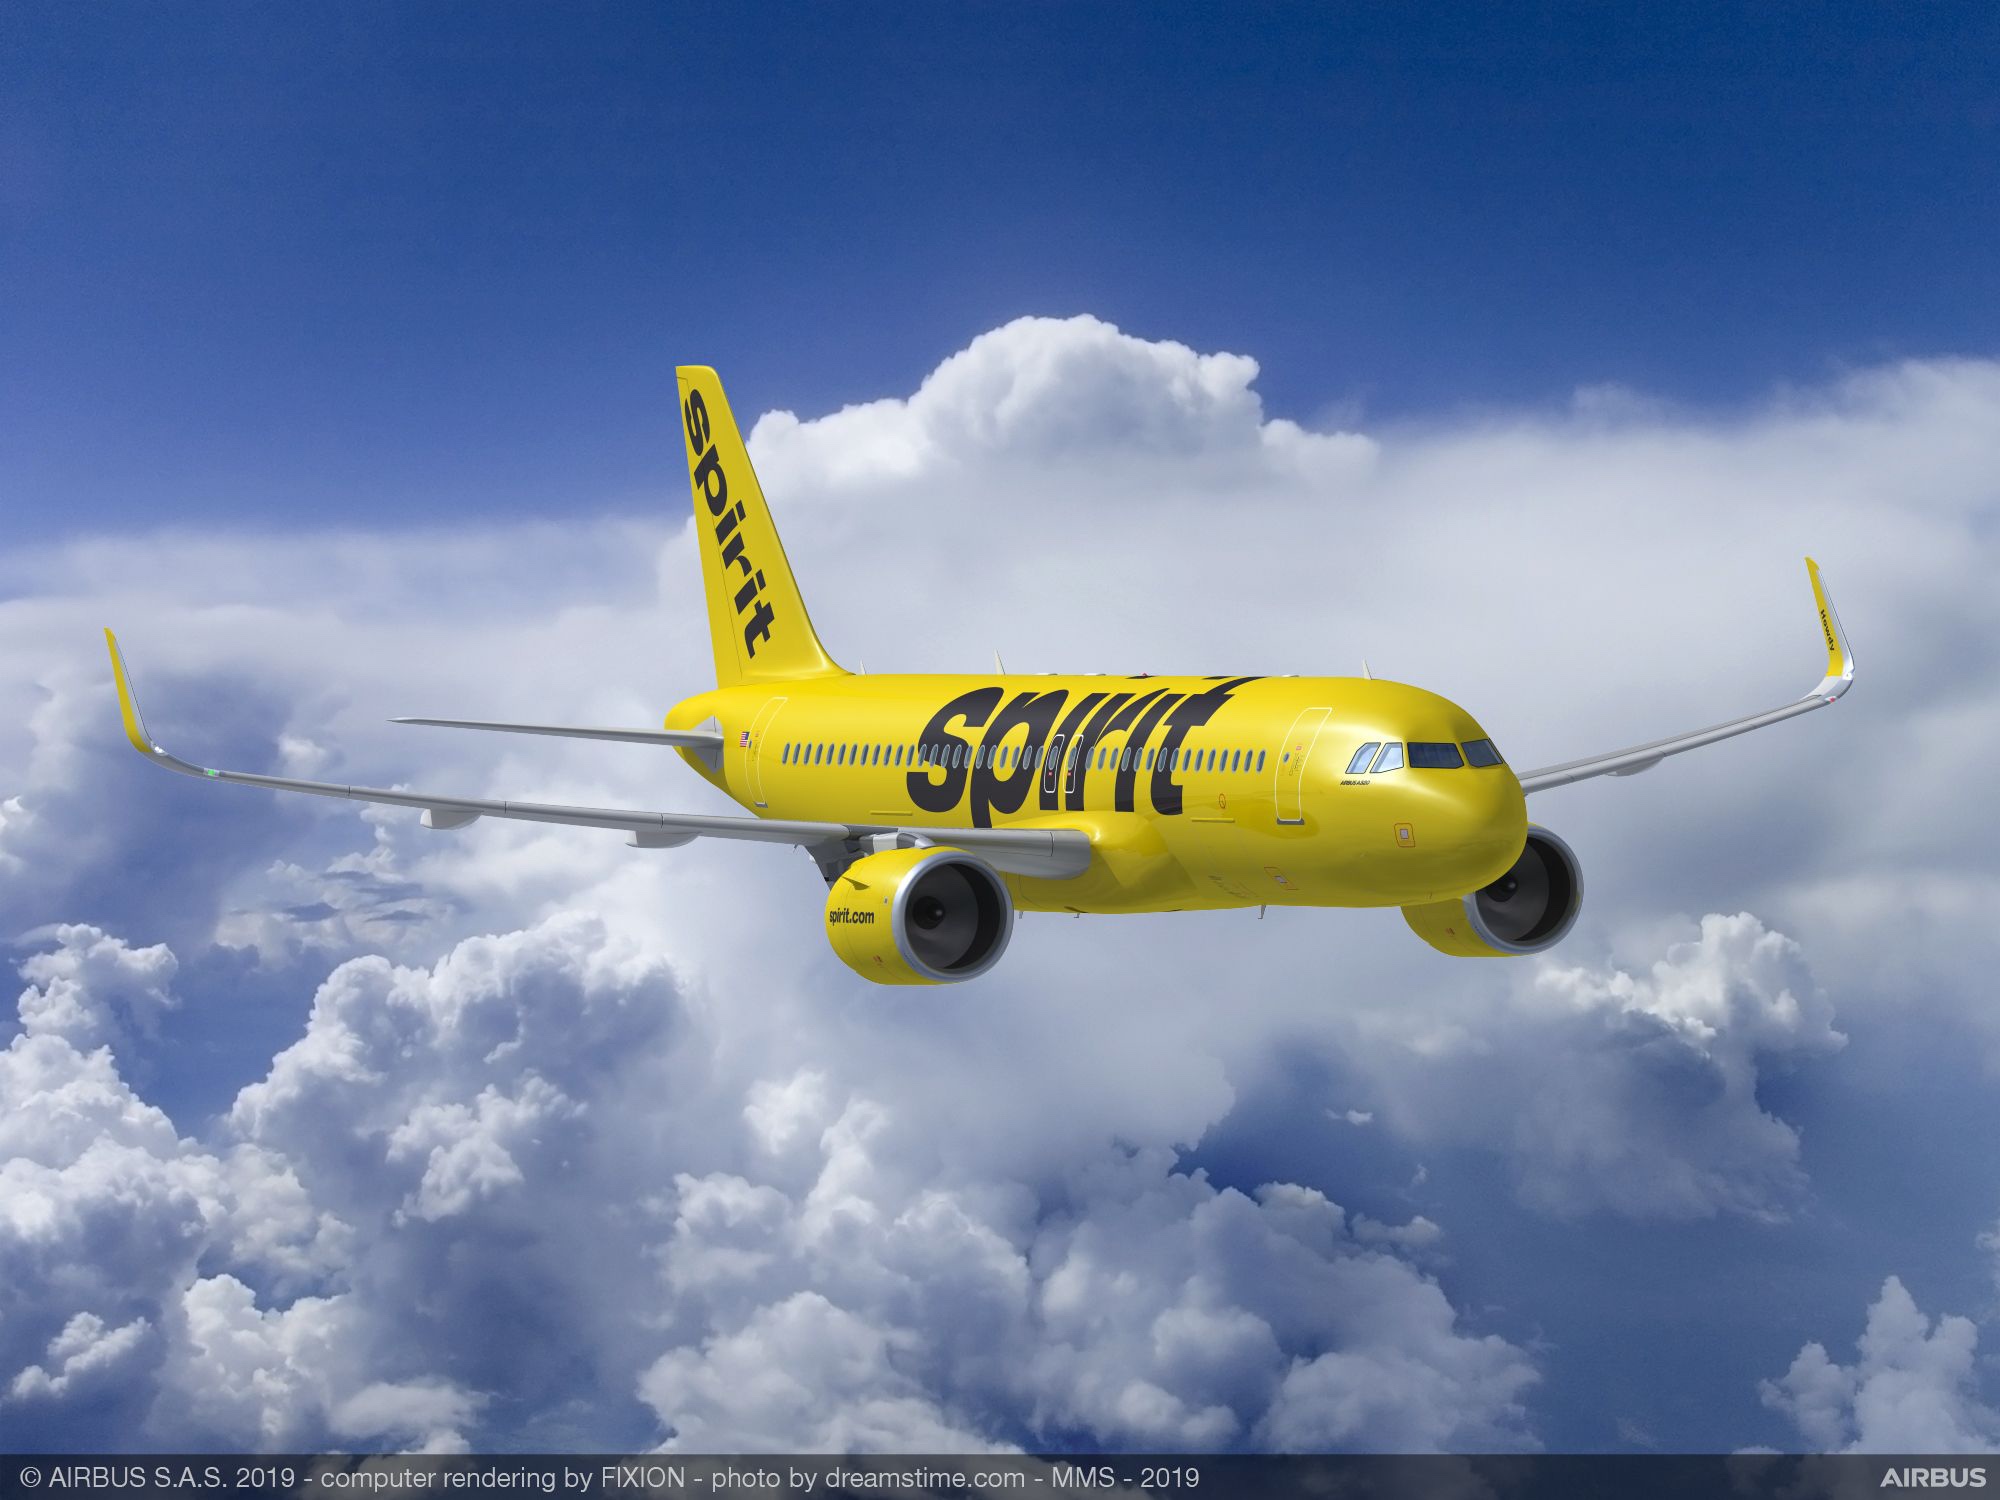 Spirit Airlines signs a MoU for up to 100 A320neo family aircraft